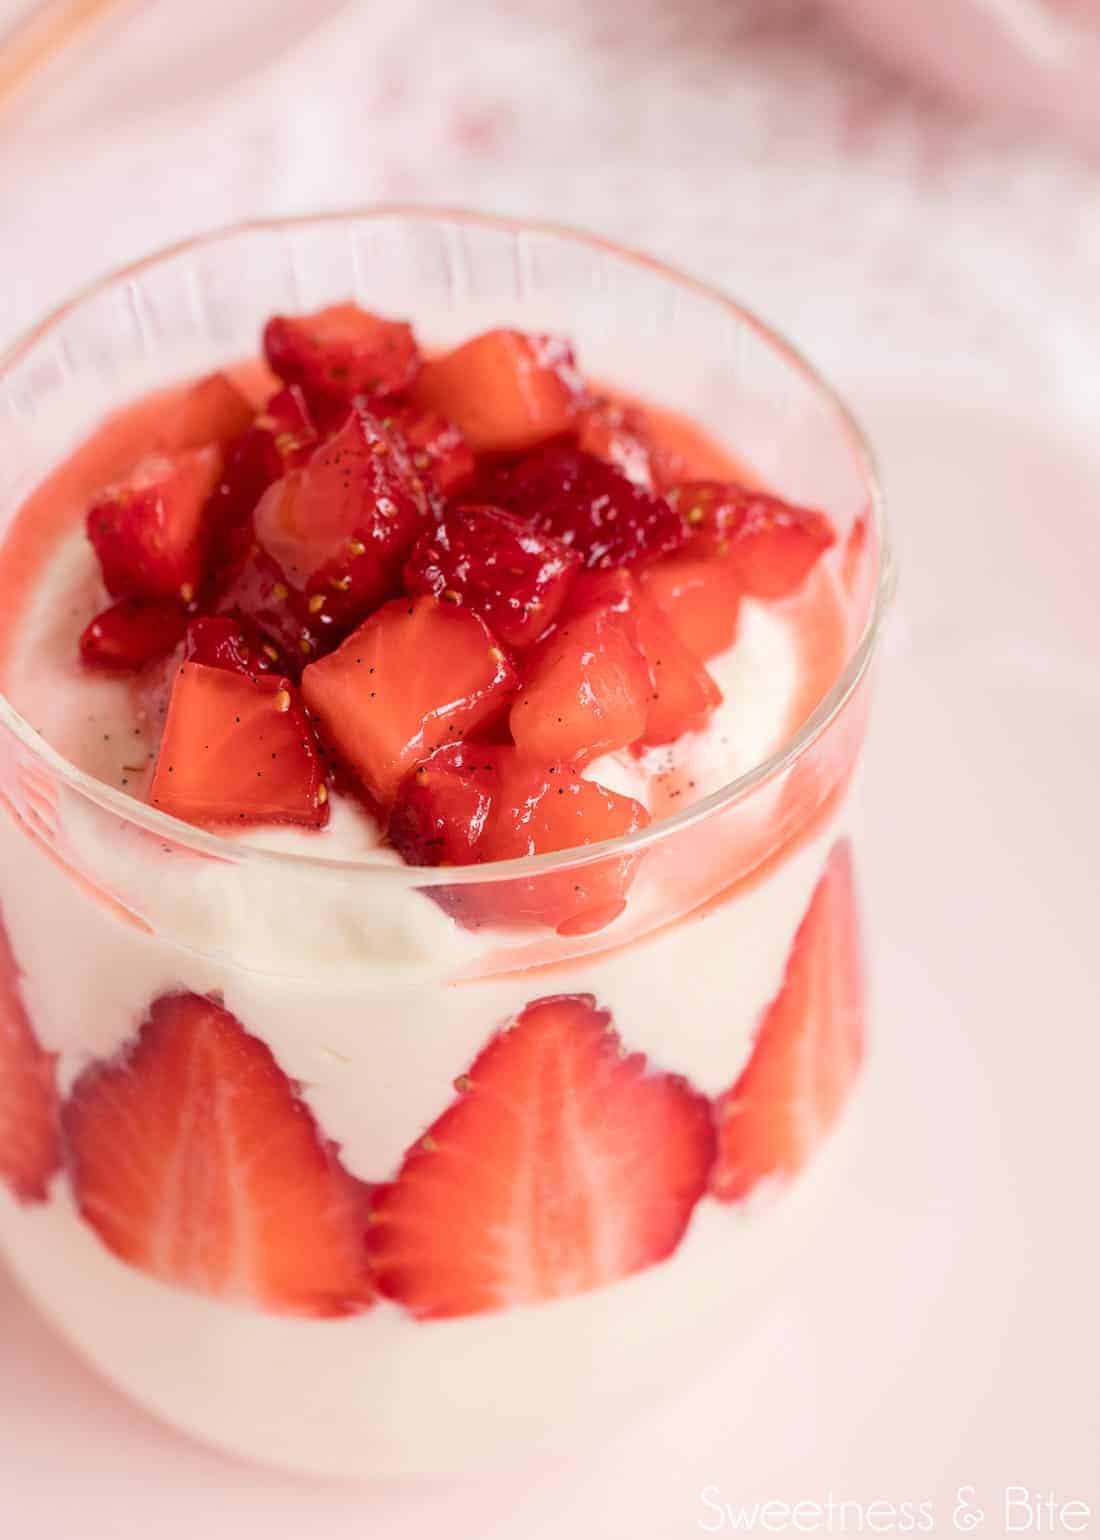 White Chocolate and Strawberry Mousse ~ by Sweetness & Bite